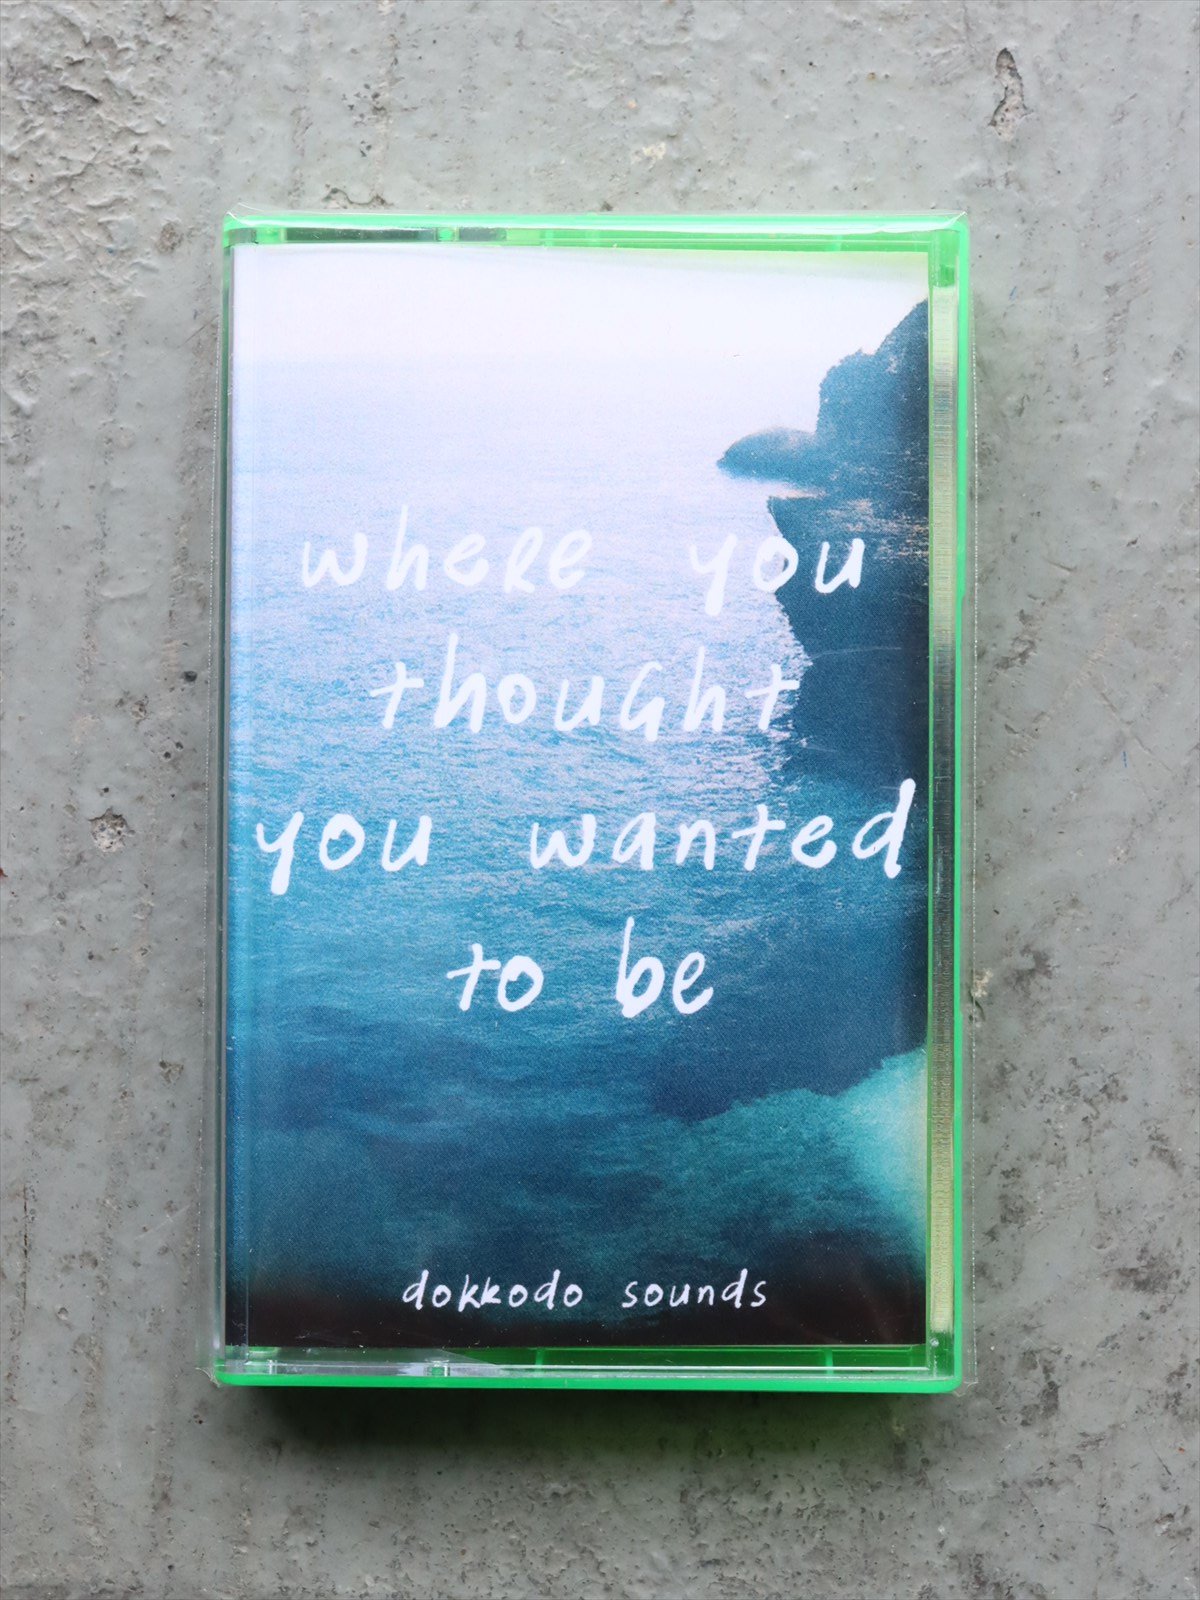 åȥơסWhere You Thought You Wanted To Be/Dokkodo Sounds


